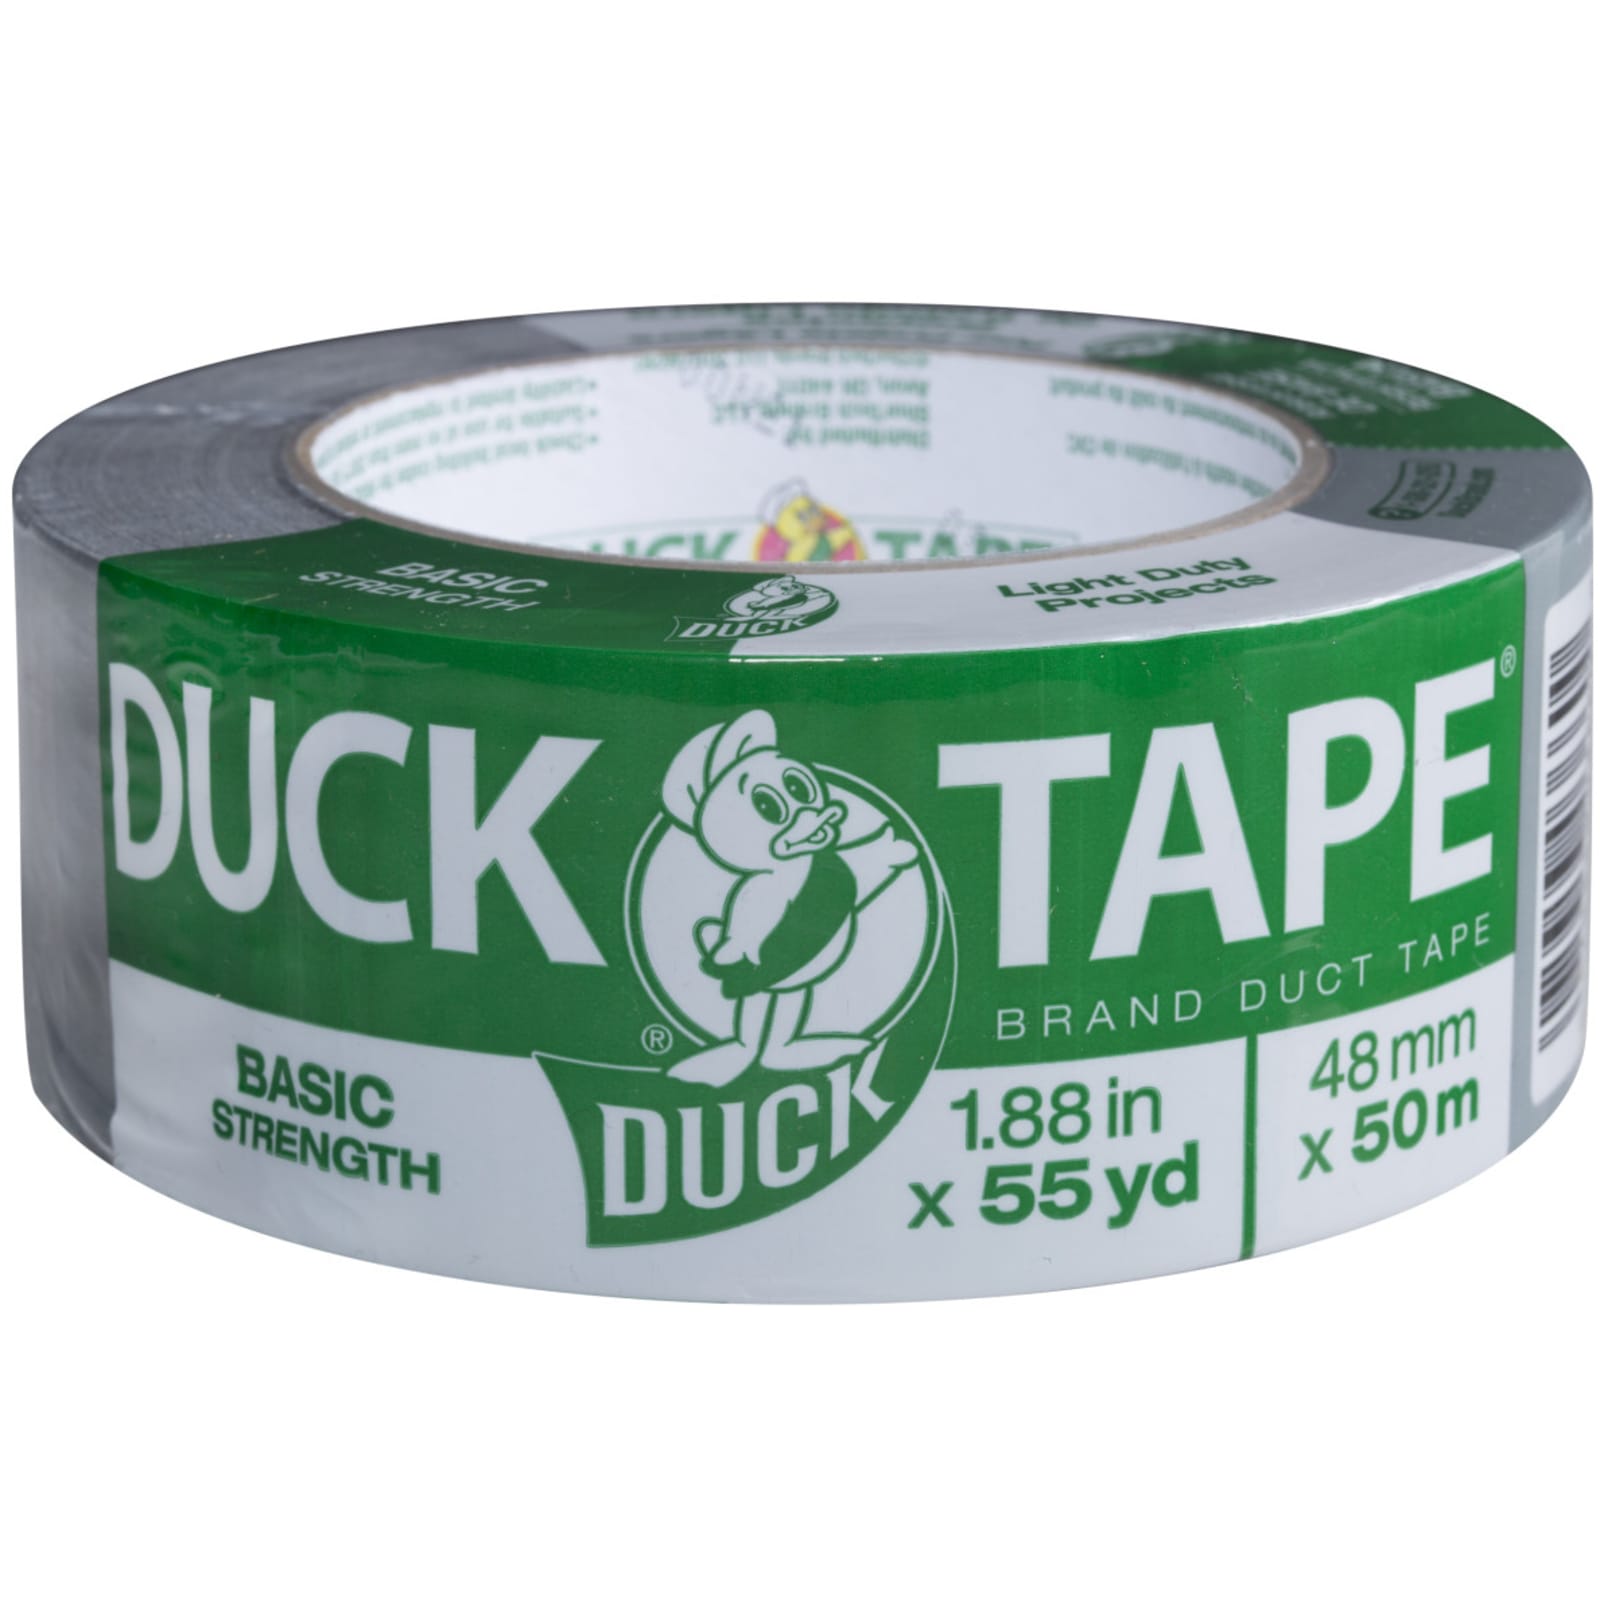 Duct Tape…How it Works & Its Benefits.